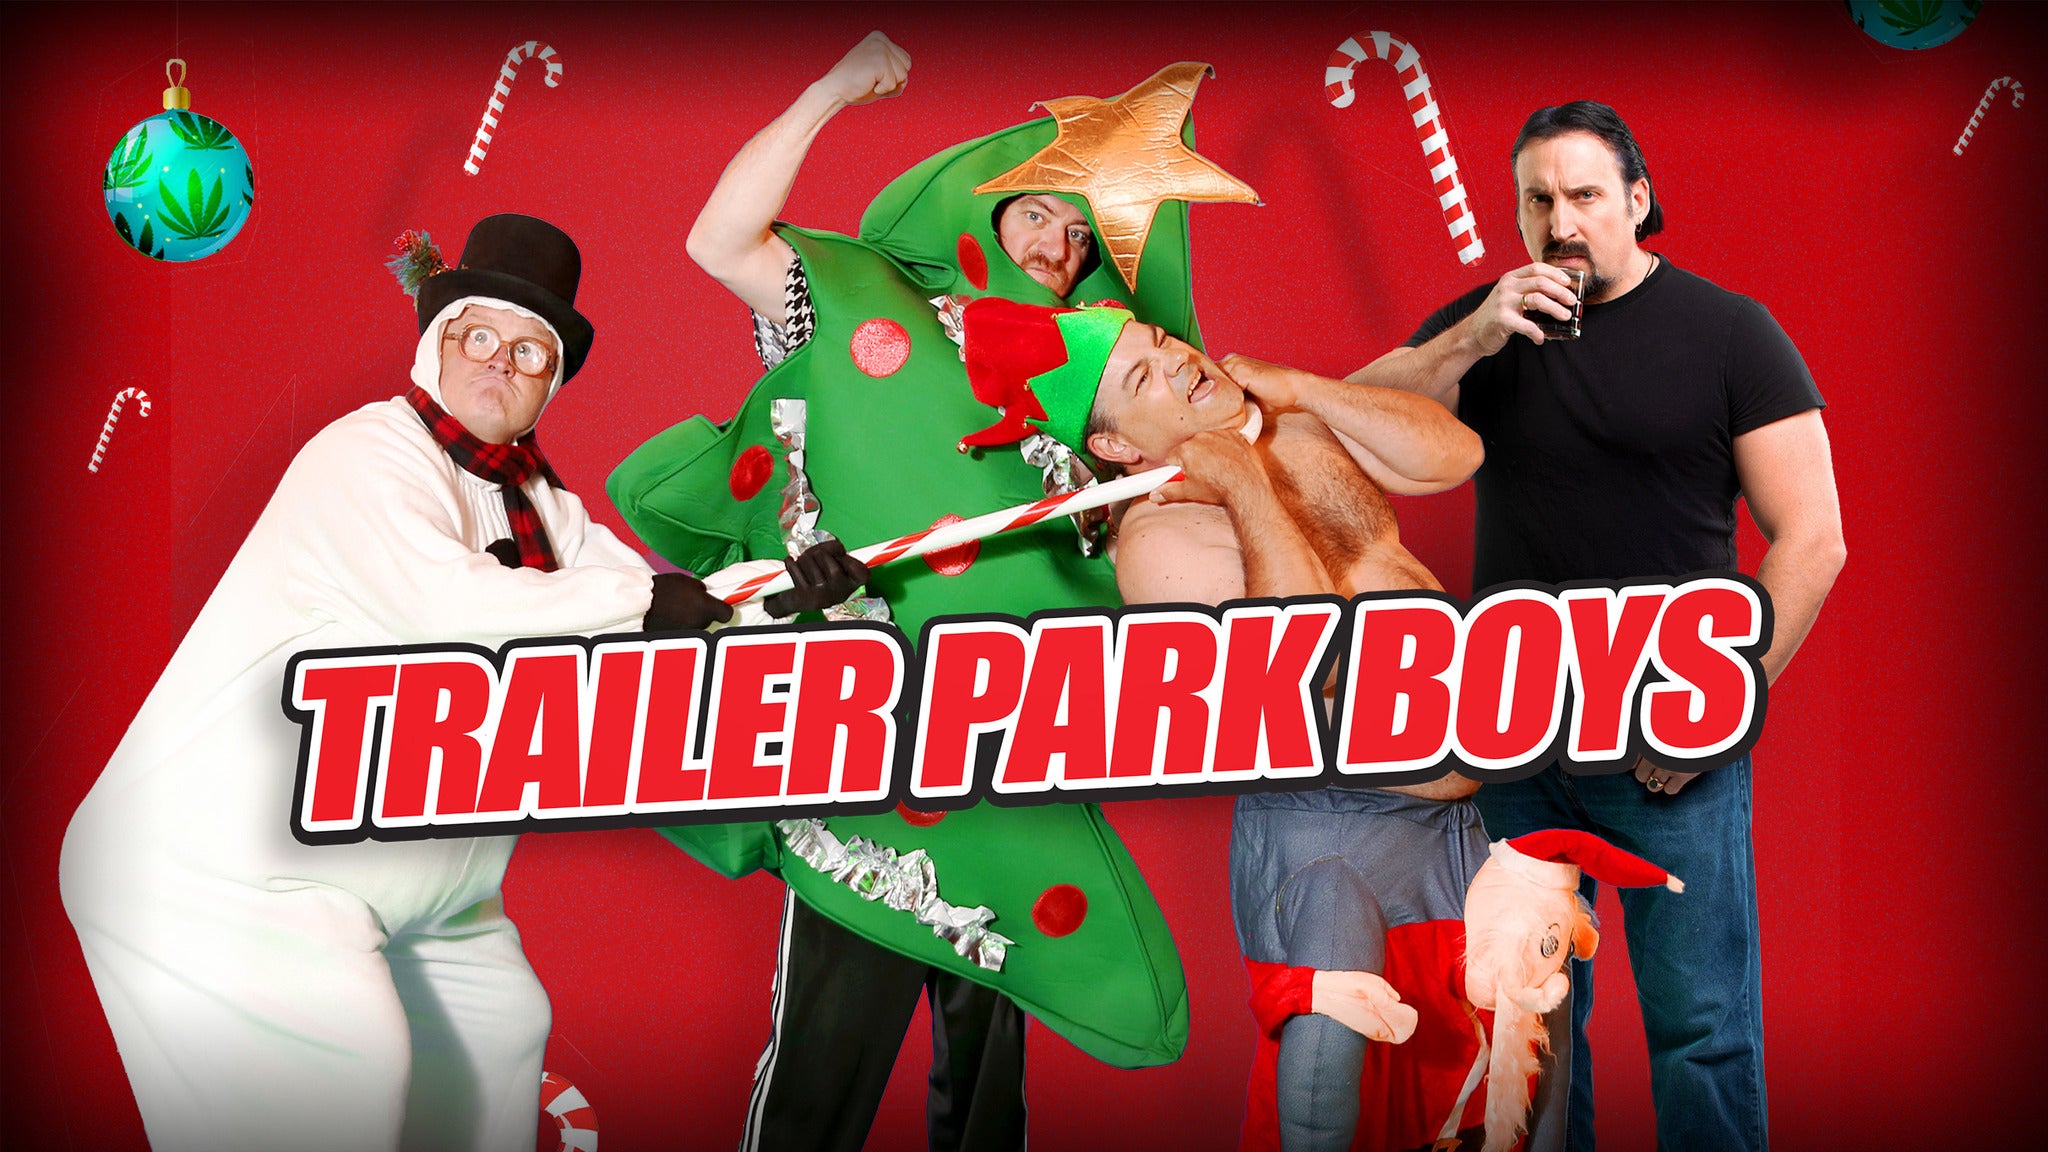 Trailer Park Boys 20th Anniversary Sunnyvale Xmas in Knoxville promo photo for Promoter presale offer code